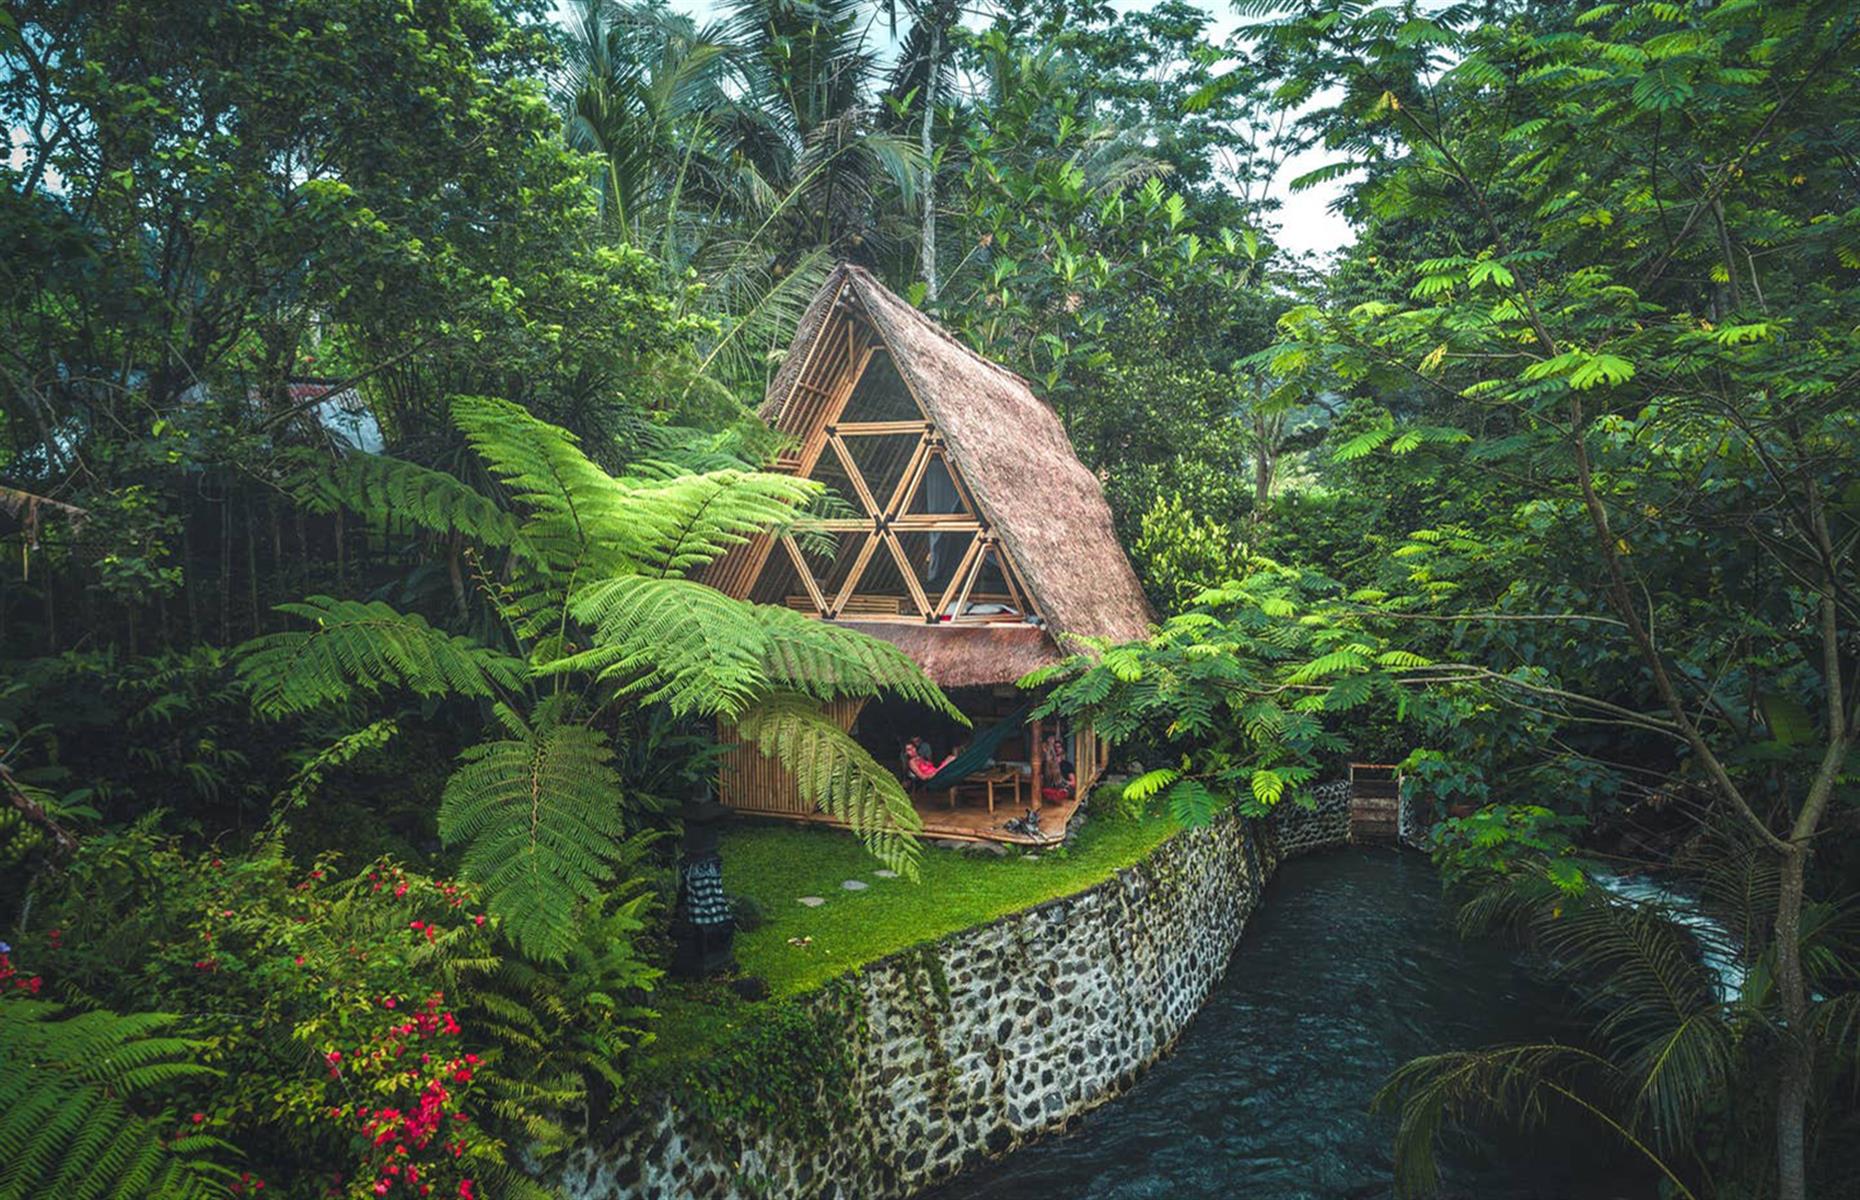 <p><a href="https://www.airbnb.co.uk/rooms/5904771">This secluded bamboo home</a> is set on the bank of a shimmering river in a peaceful Balinese village. It may be rustic but there's a kitchen, bathroom and bedroom which sleeps up to four. Guests can relax on the hammock or bean bag and listen to the sound of the water below. There’s limited Wi-Fi here but who needs the internet when there are cute kittens to play with? They often use this jungle hideout as a shelter.</p>